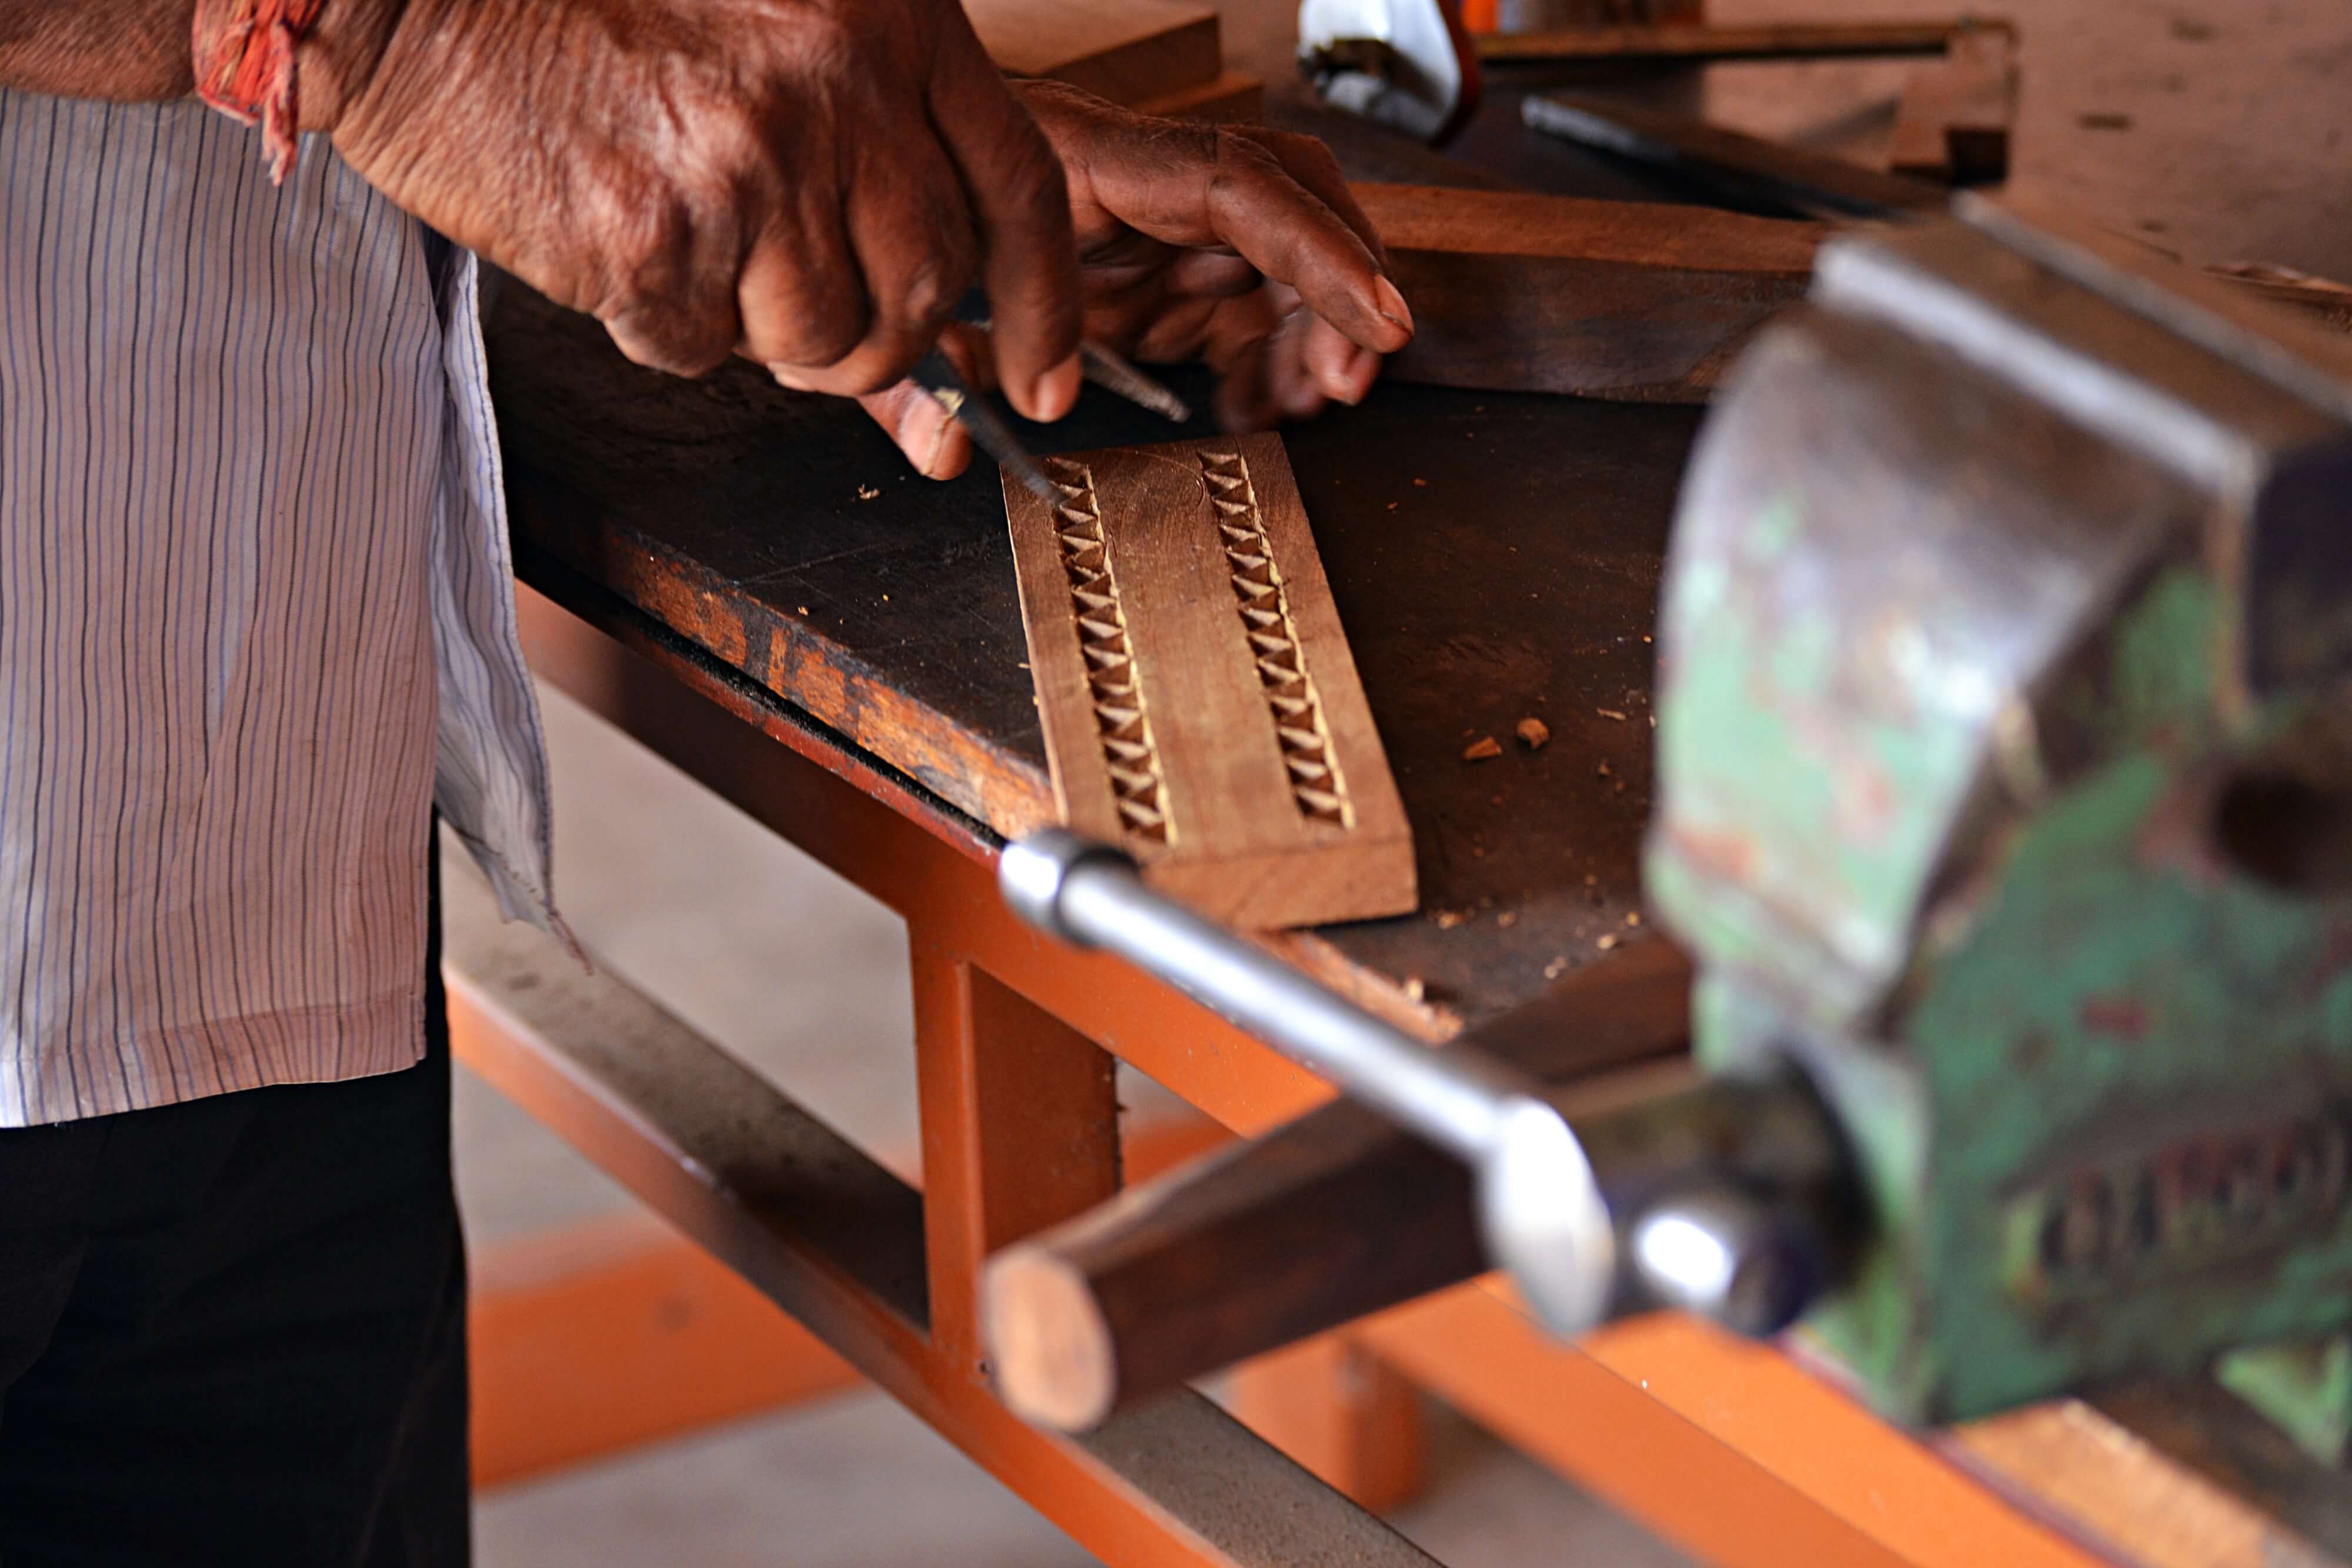 But a stay with Apani Dhani is also a chance to go beyond the surface and understand the rich craft heritage of the local community through workshops.